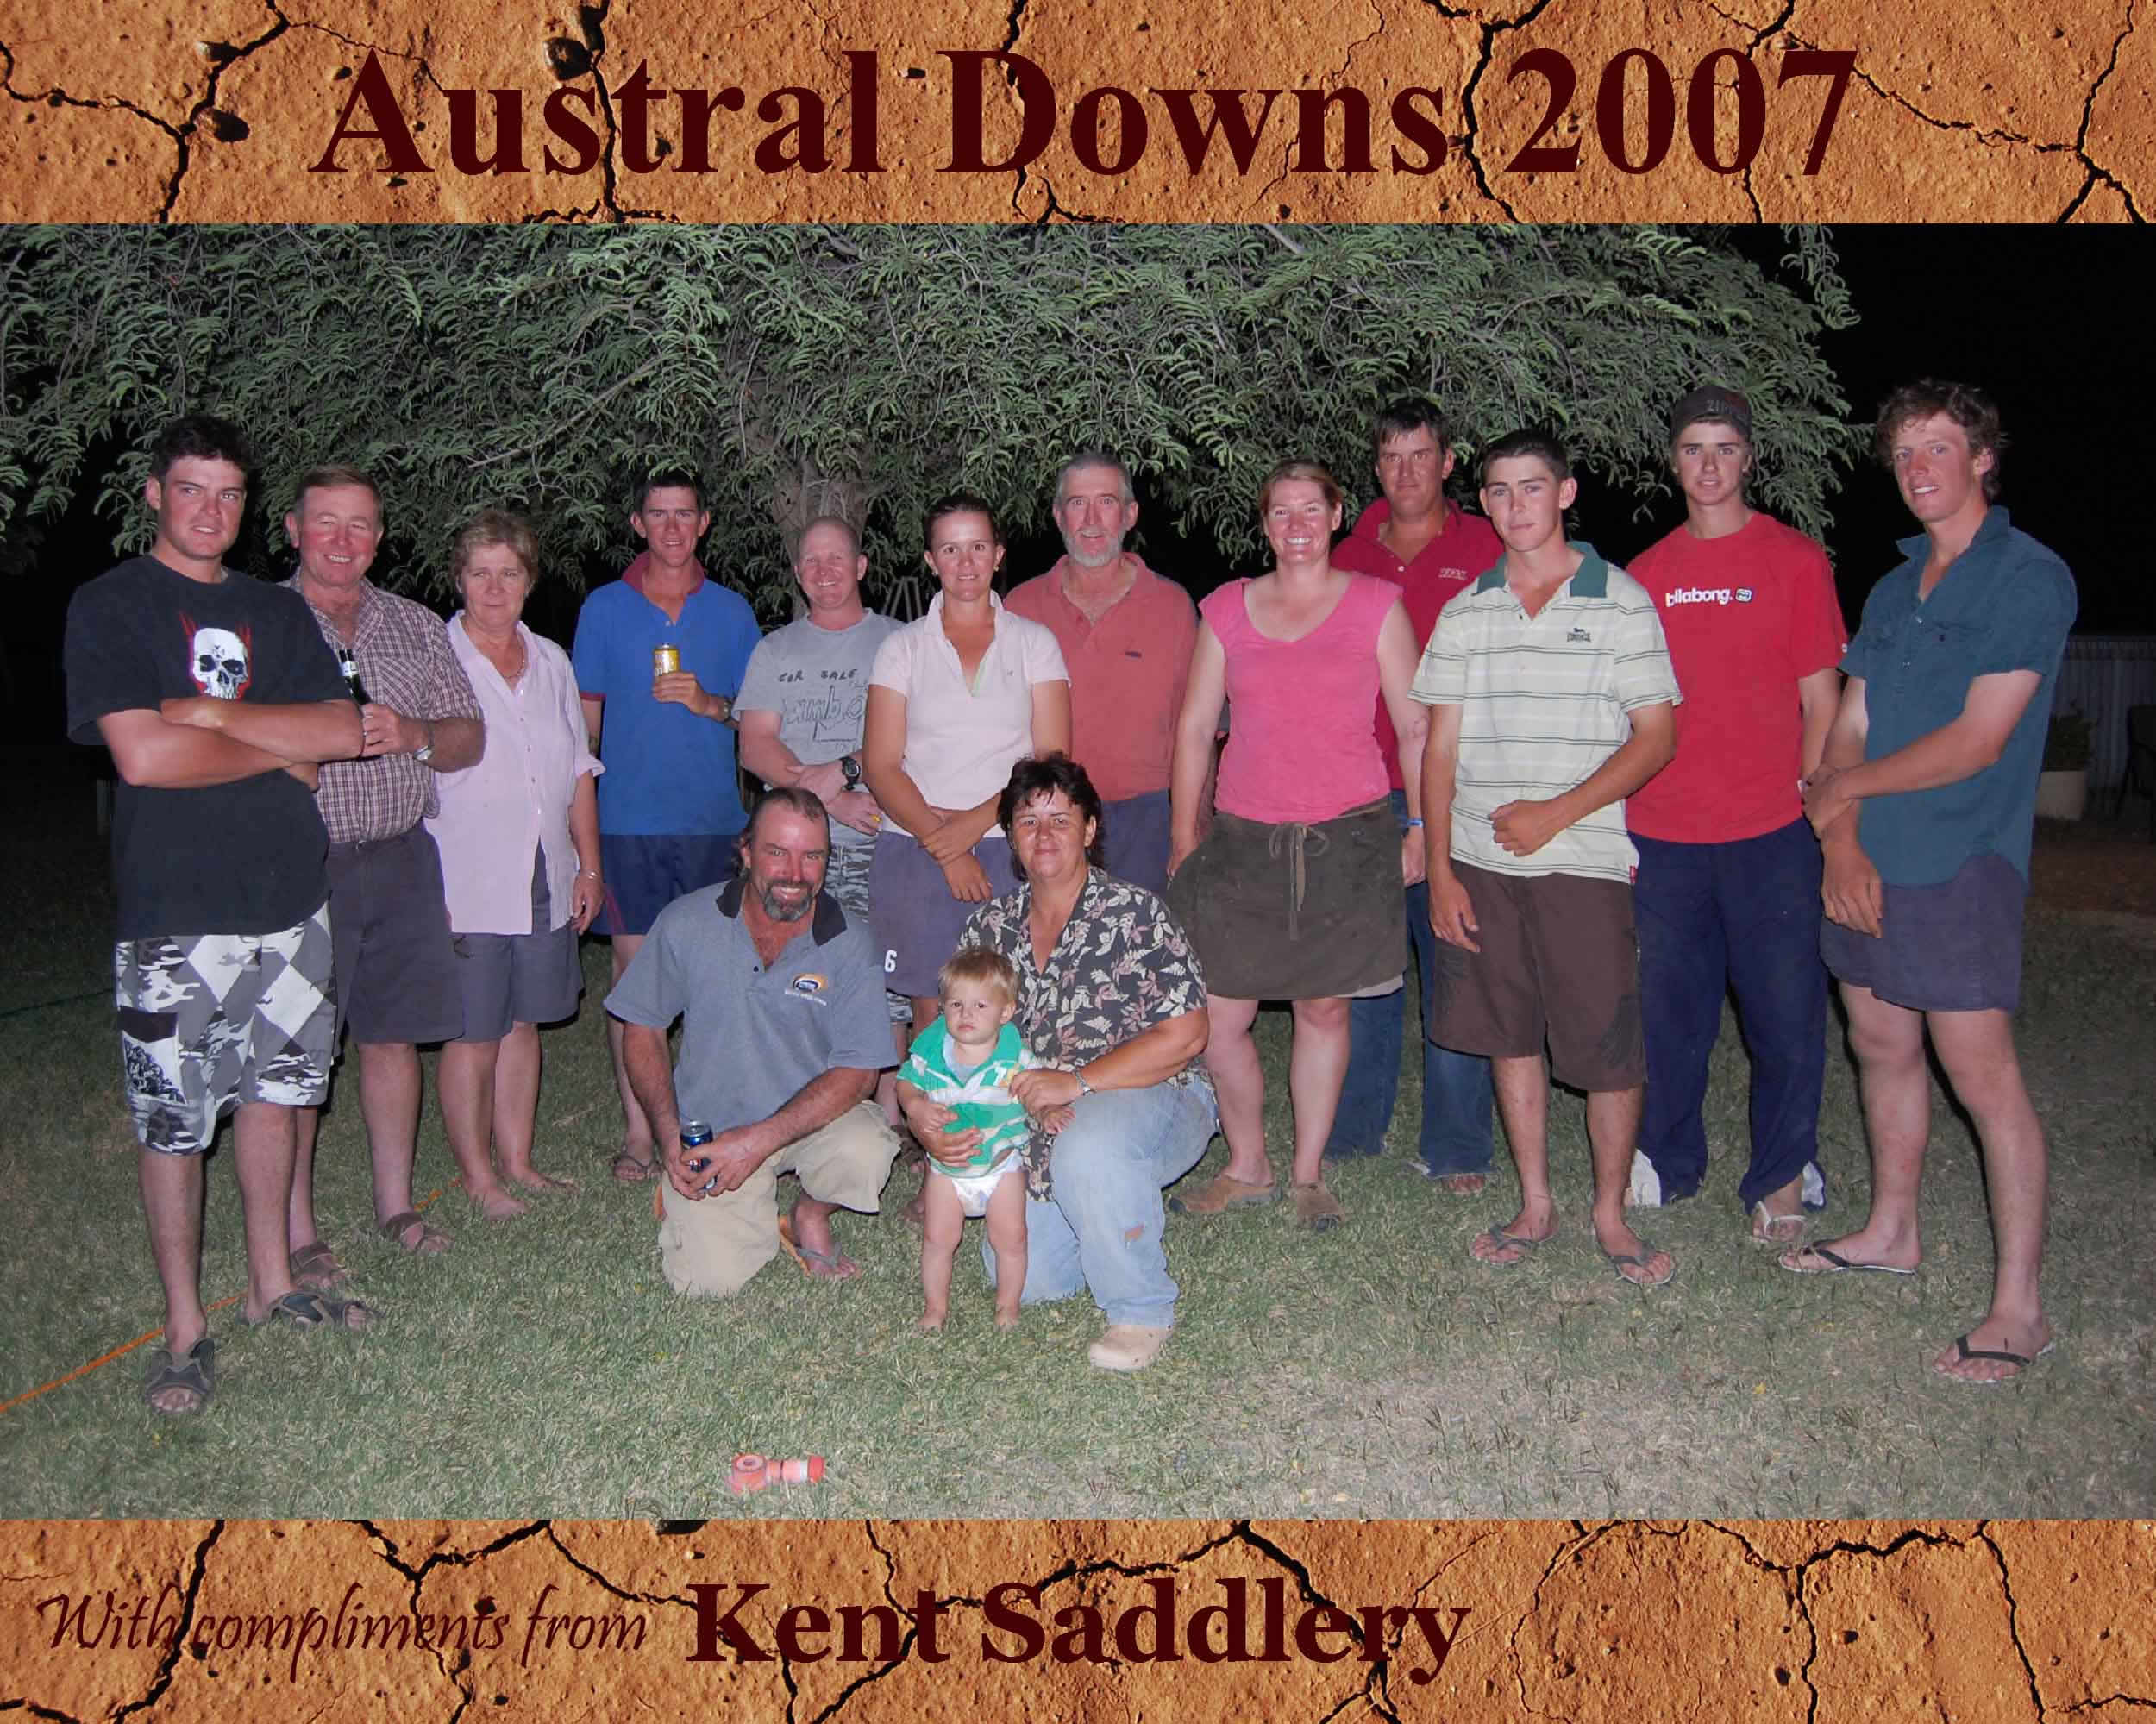 Northern Territory - Austral Downs 15